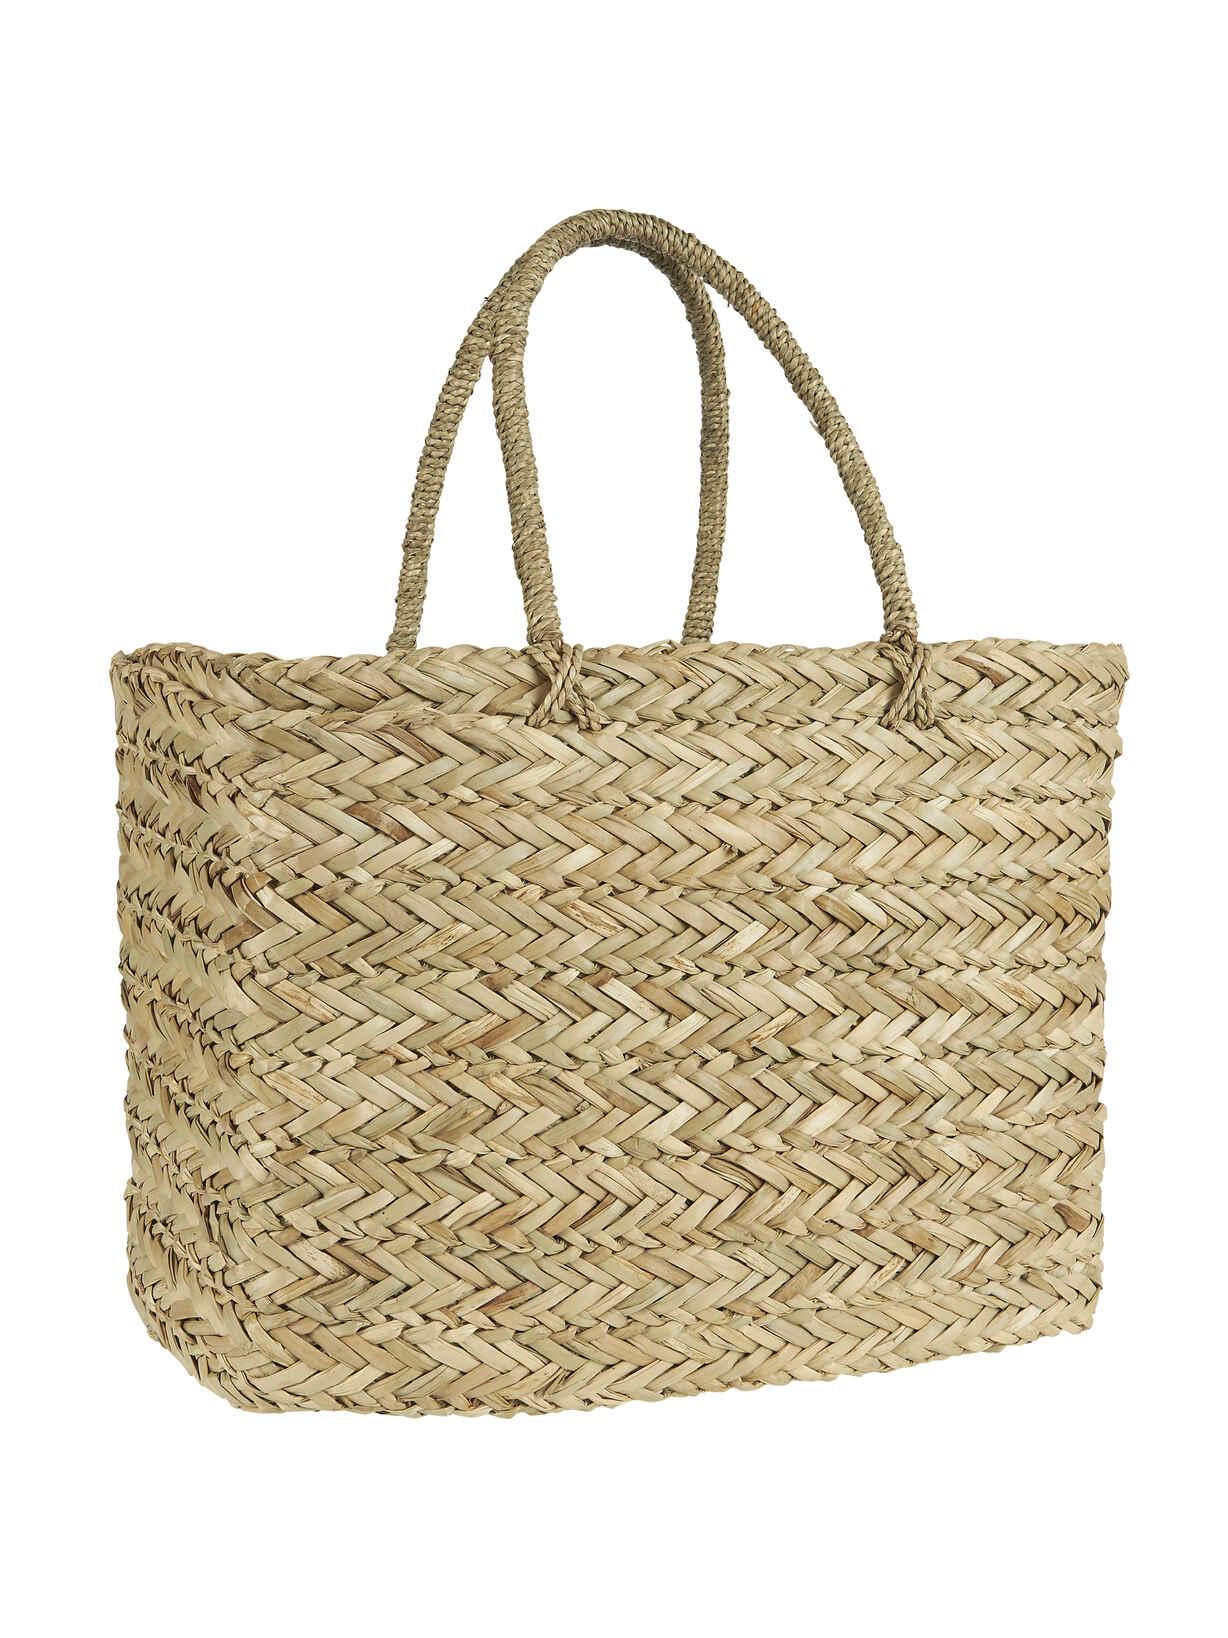 Large Seagrass Tote Bag | Woeb Seagrass Bag | Nordic House